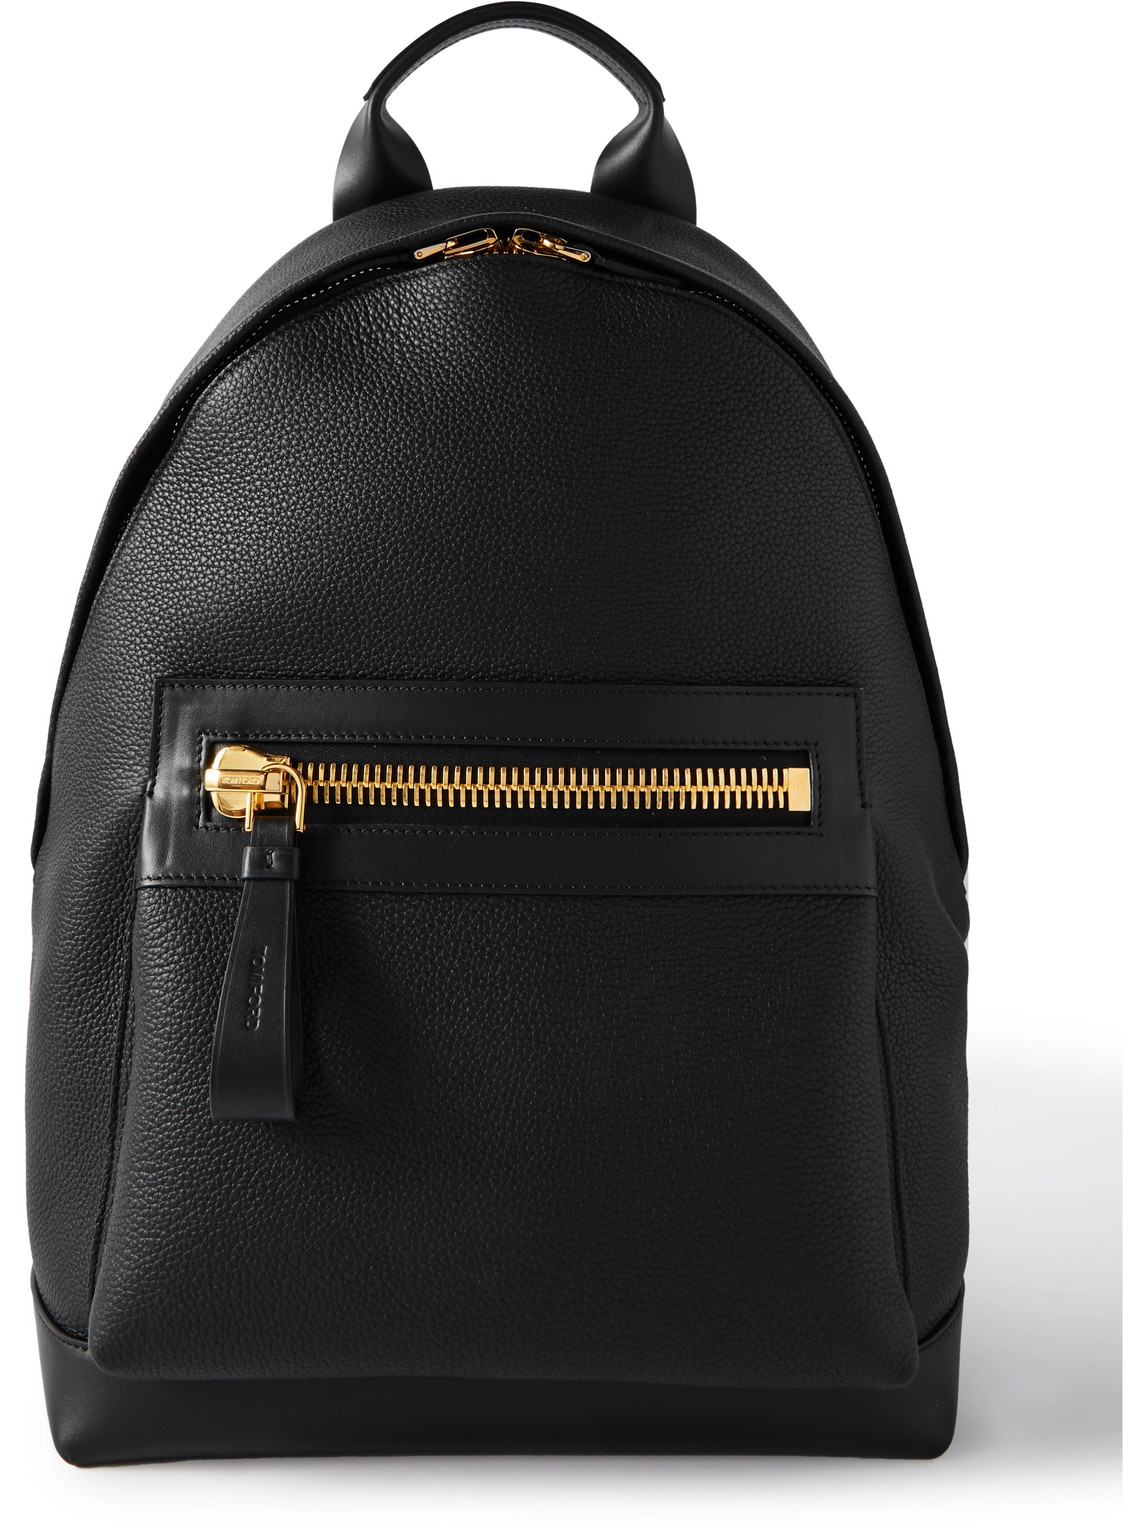 TOM FORD BUCKLEY PEBBLE-GRAIN LEATHER BACKPACK